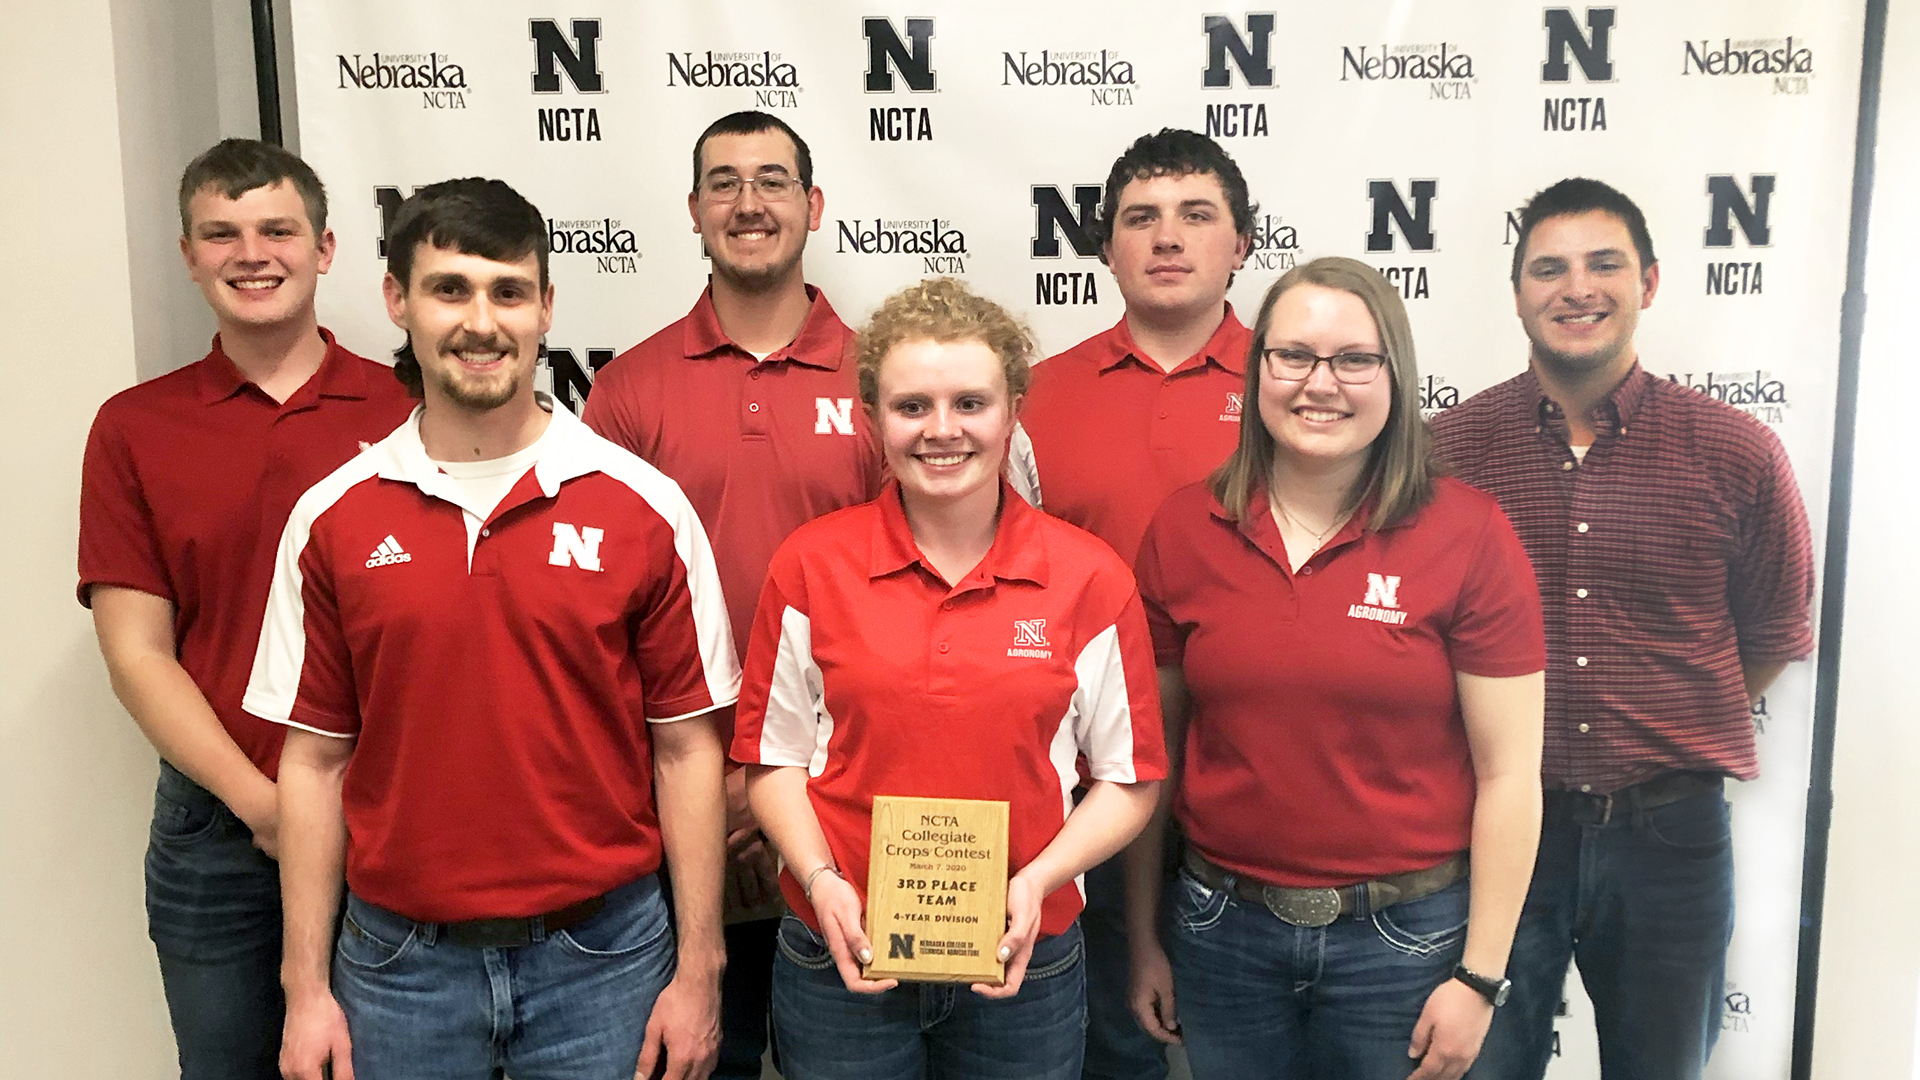 The University of Nebraska–Lincoln Crops Judging Team places third overall in the four-year division at the NCTA Collegiate Crops Contest March 7 in Curtis, Nebraska. The team includes Jared Stander (from left), Justin Zoucha, Korbin Kudera, Sarina Janssen, Jacob Vallery, Katie Jo Steffen and Adam Stiegel, team coach.